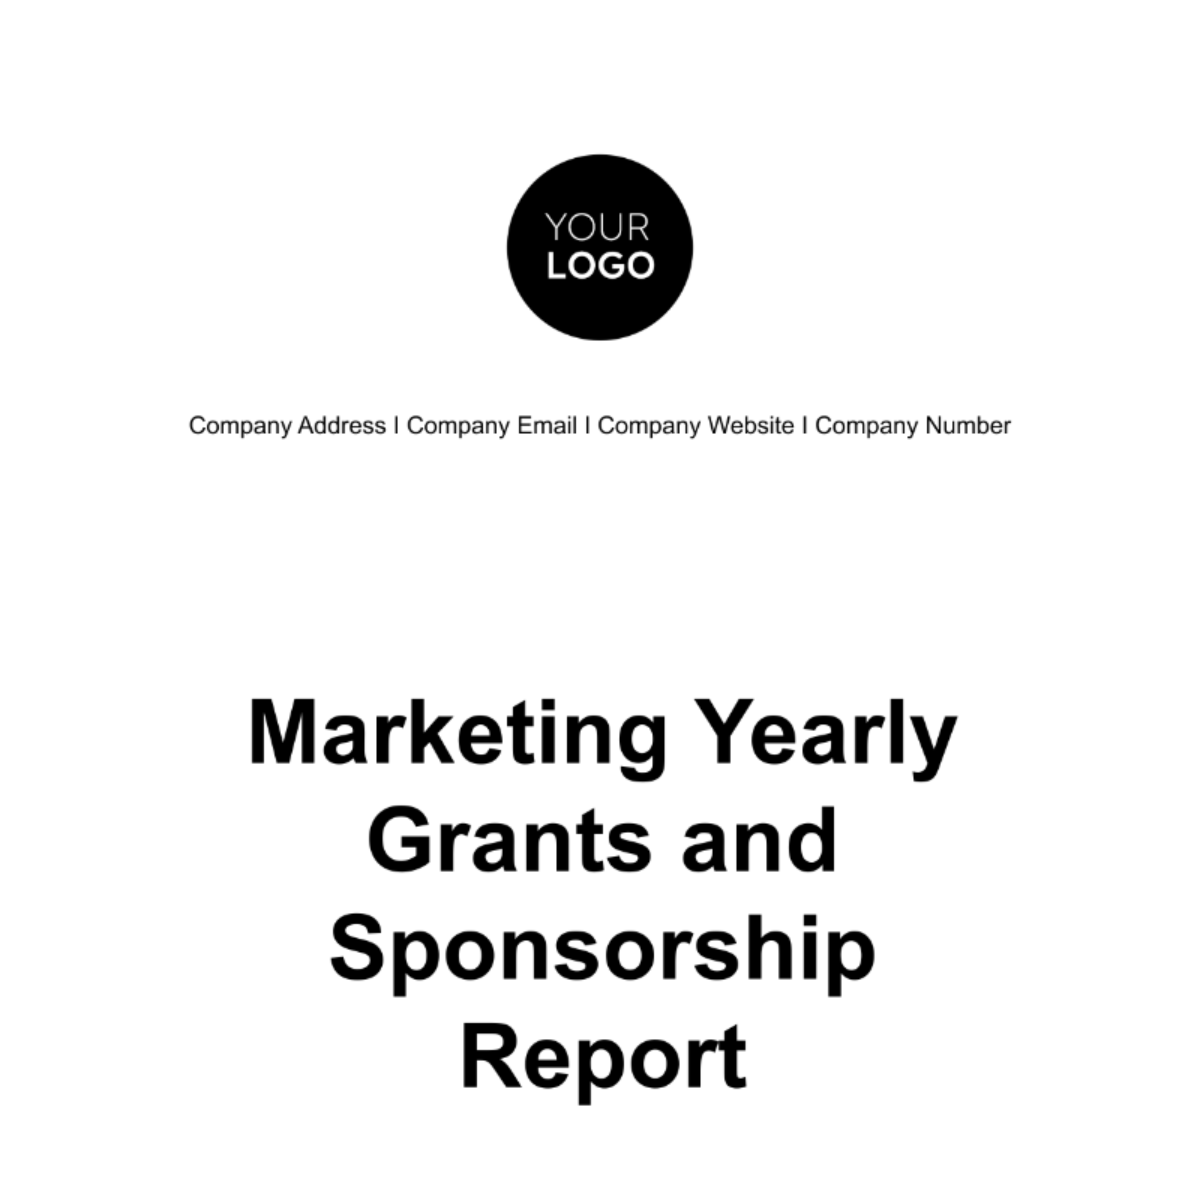 Marketing Yearly Grants and Sponsorship Report Template